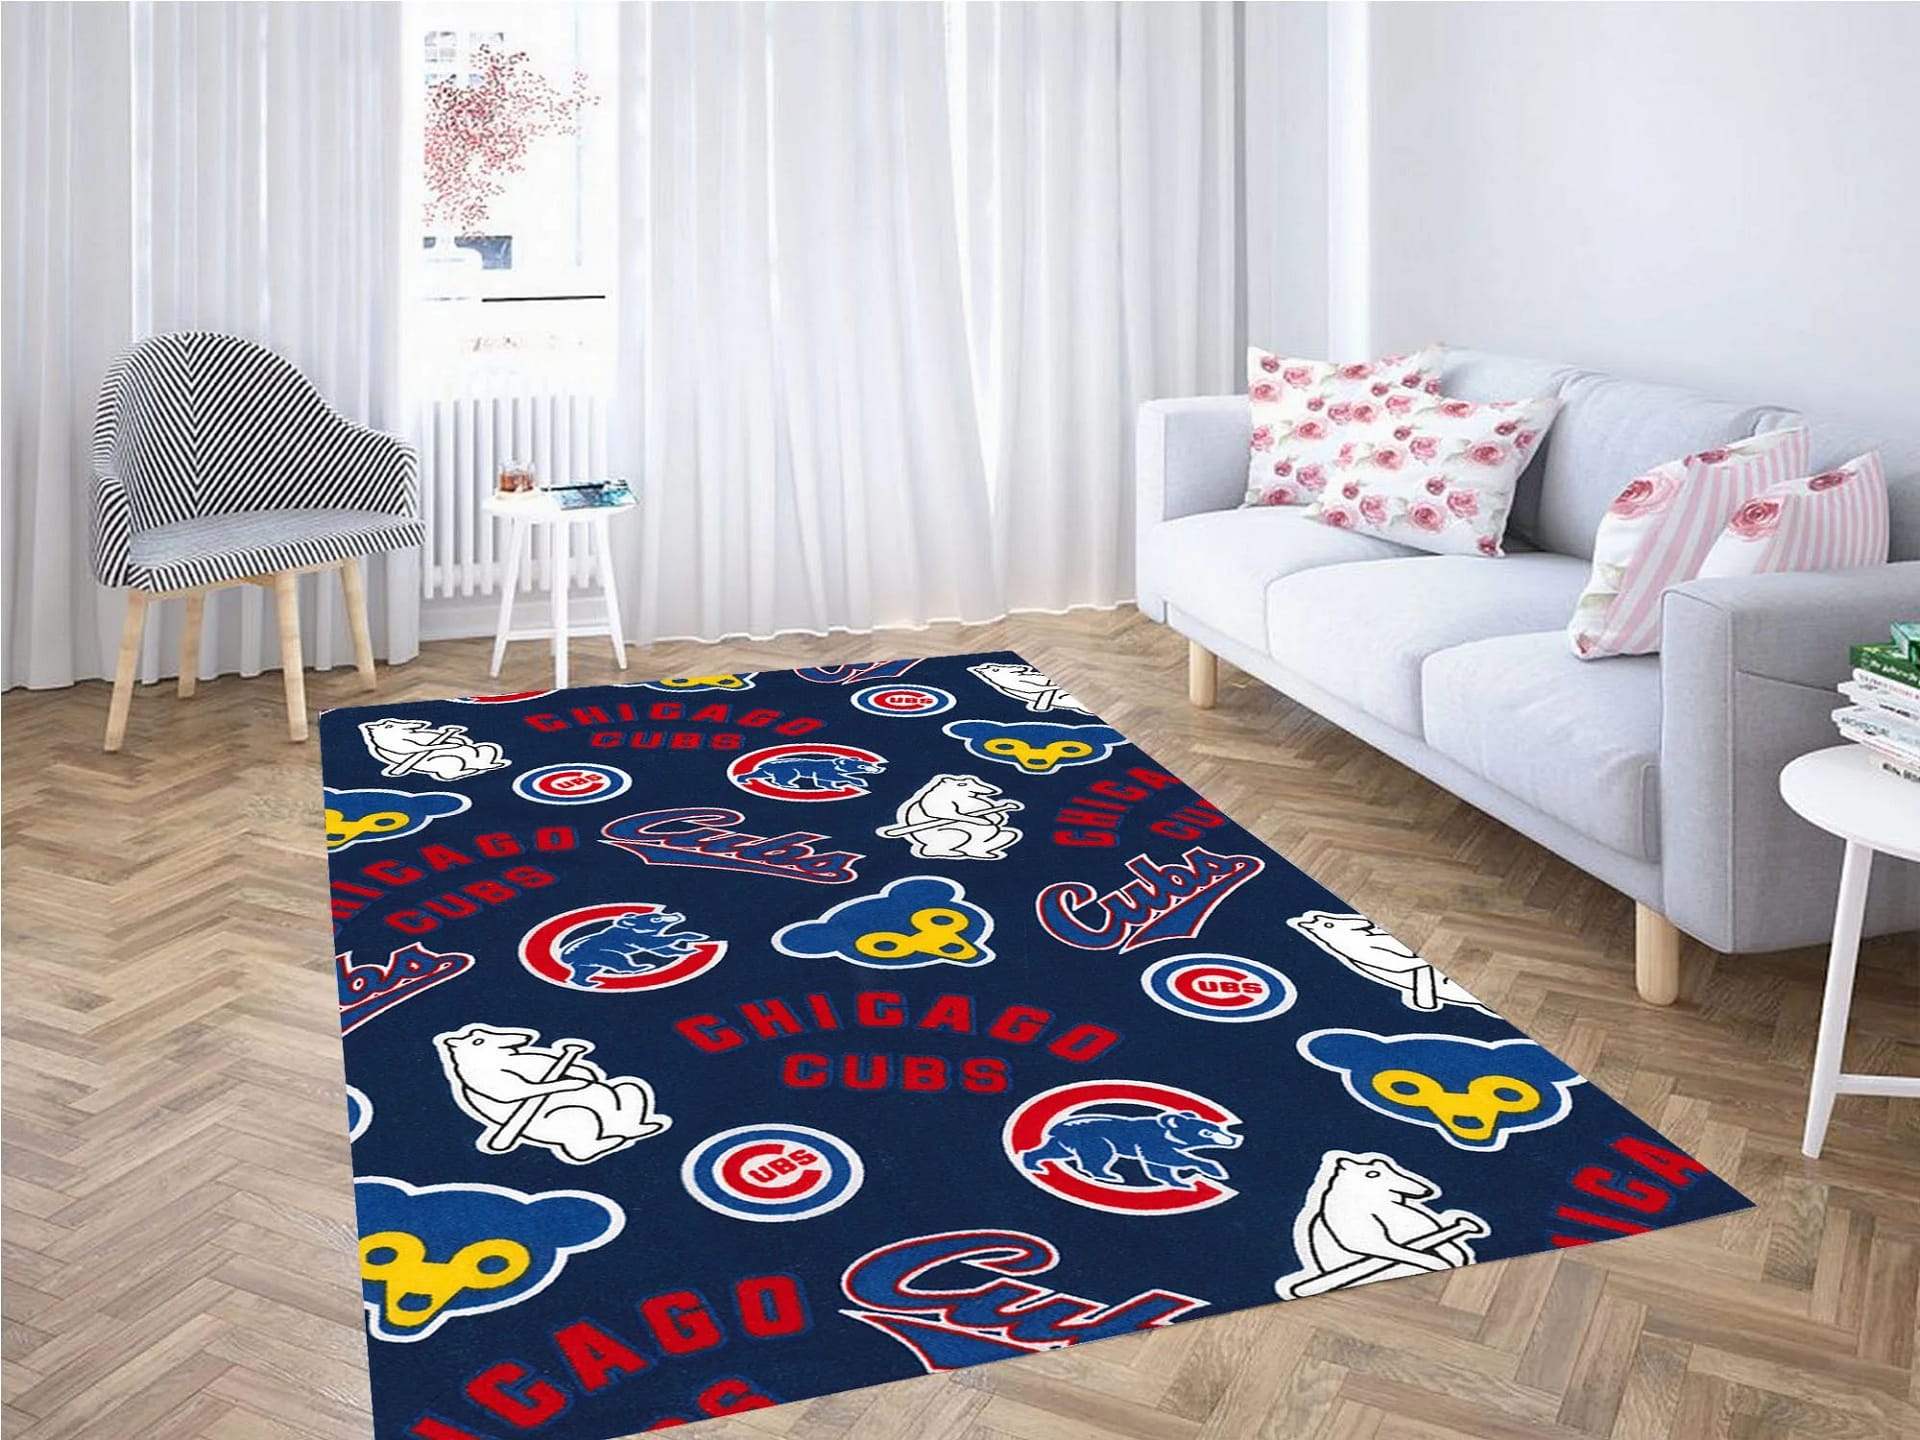 Cooperstown Chicago Cubs Cotton Fabric Carpet Rug